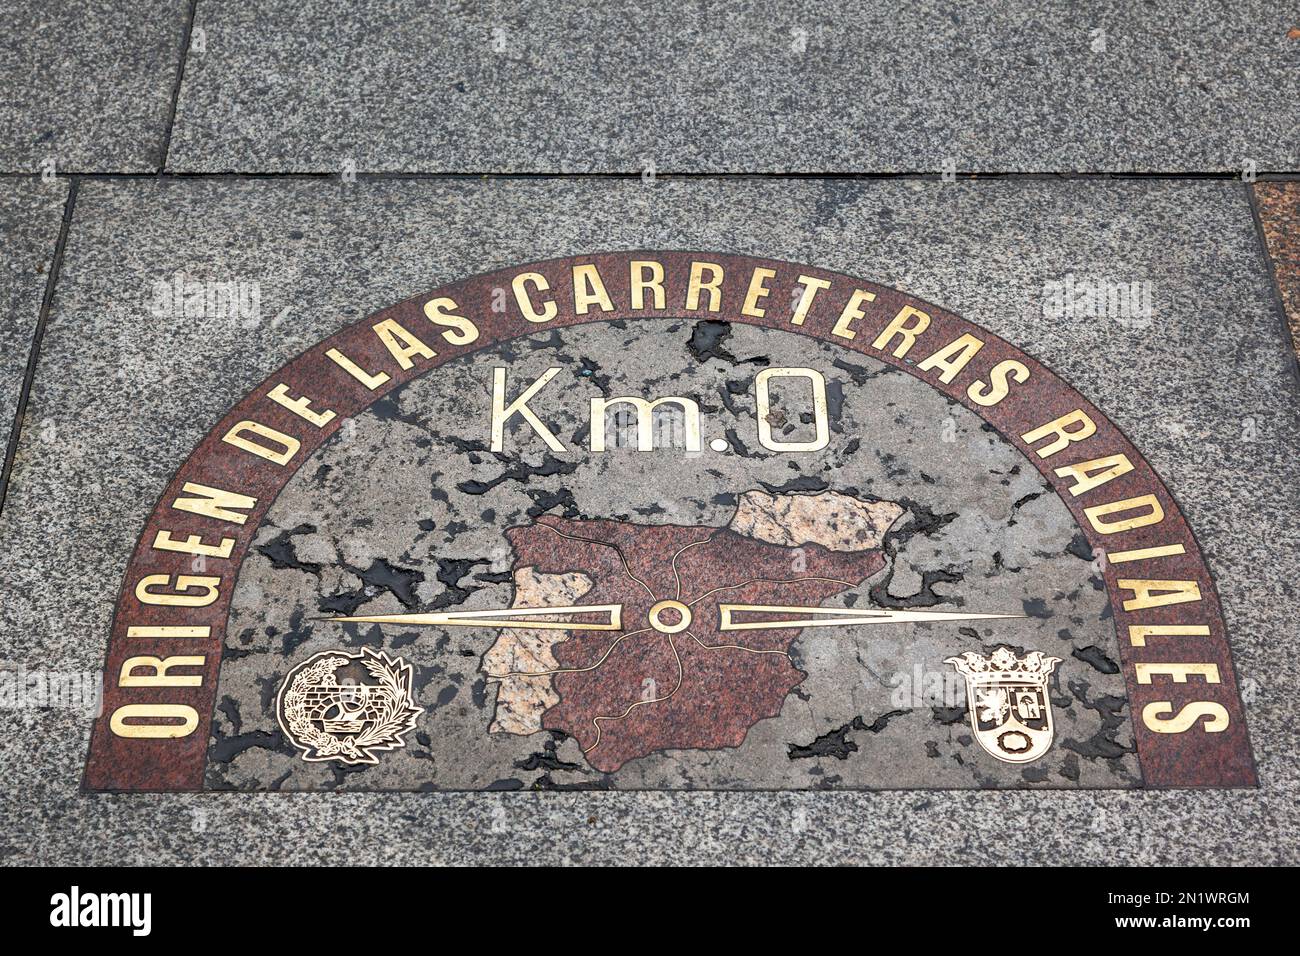 The Kilometer Zero Plaque in Puerta del Sol, Madrid, Spain. It marks the origin of the six biggest national radial highways that start from Madrid. Stock Photo